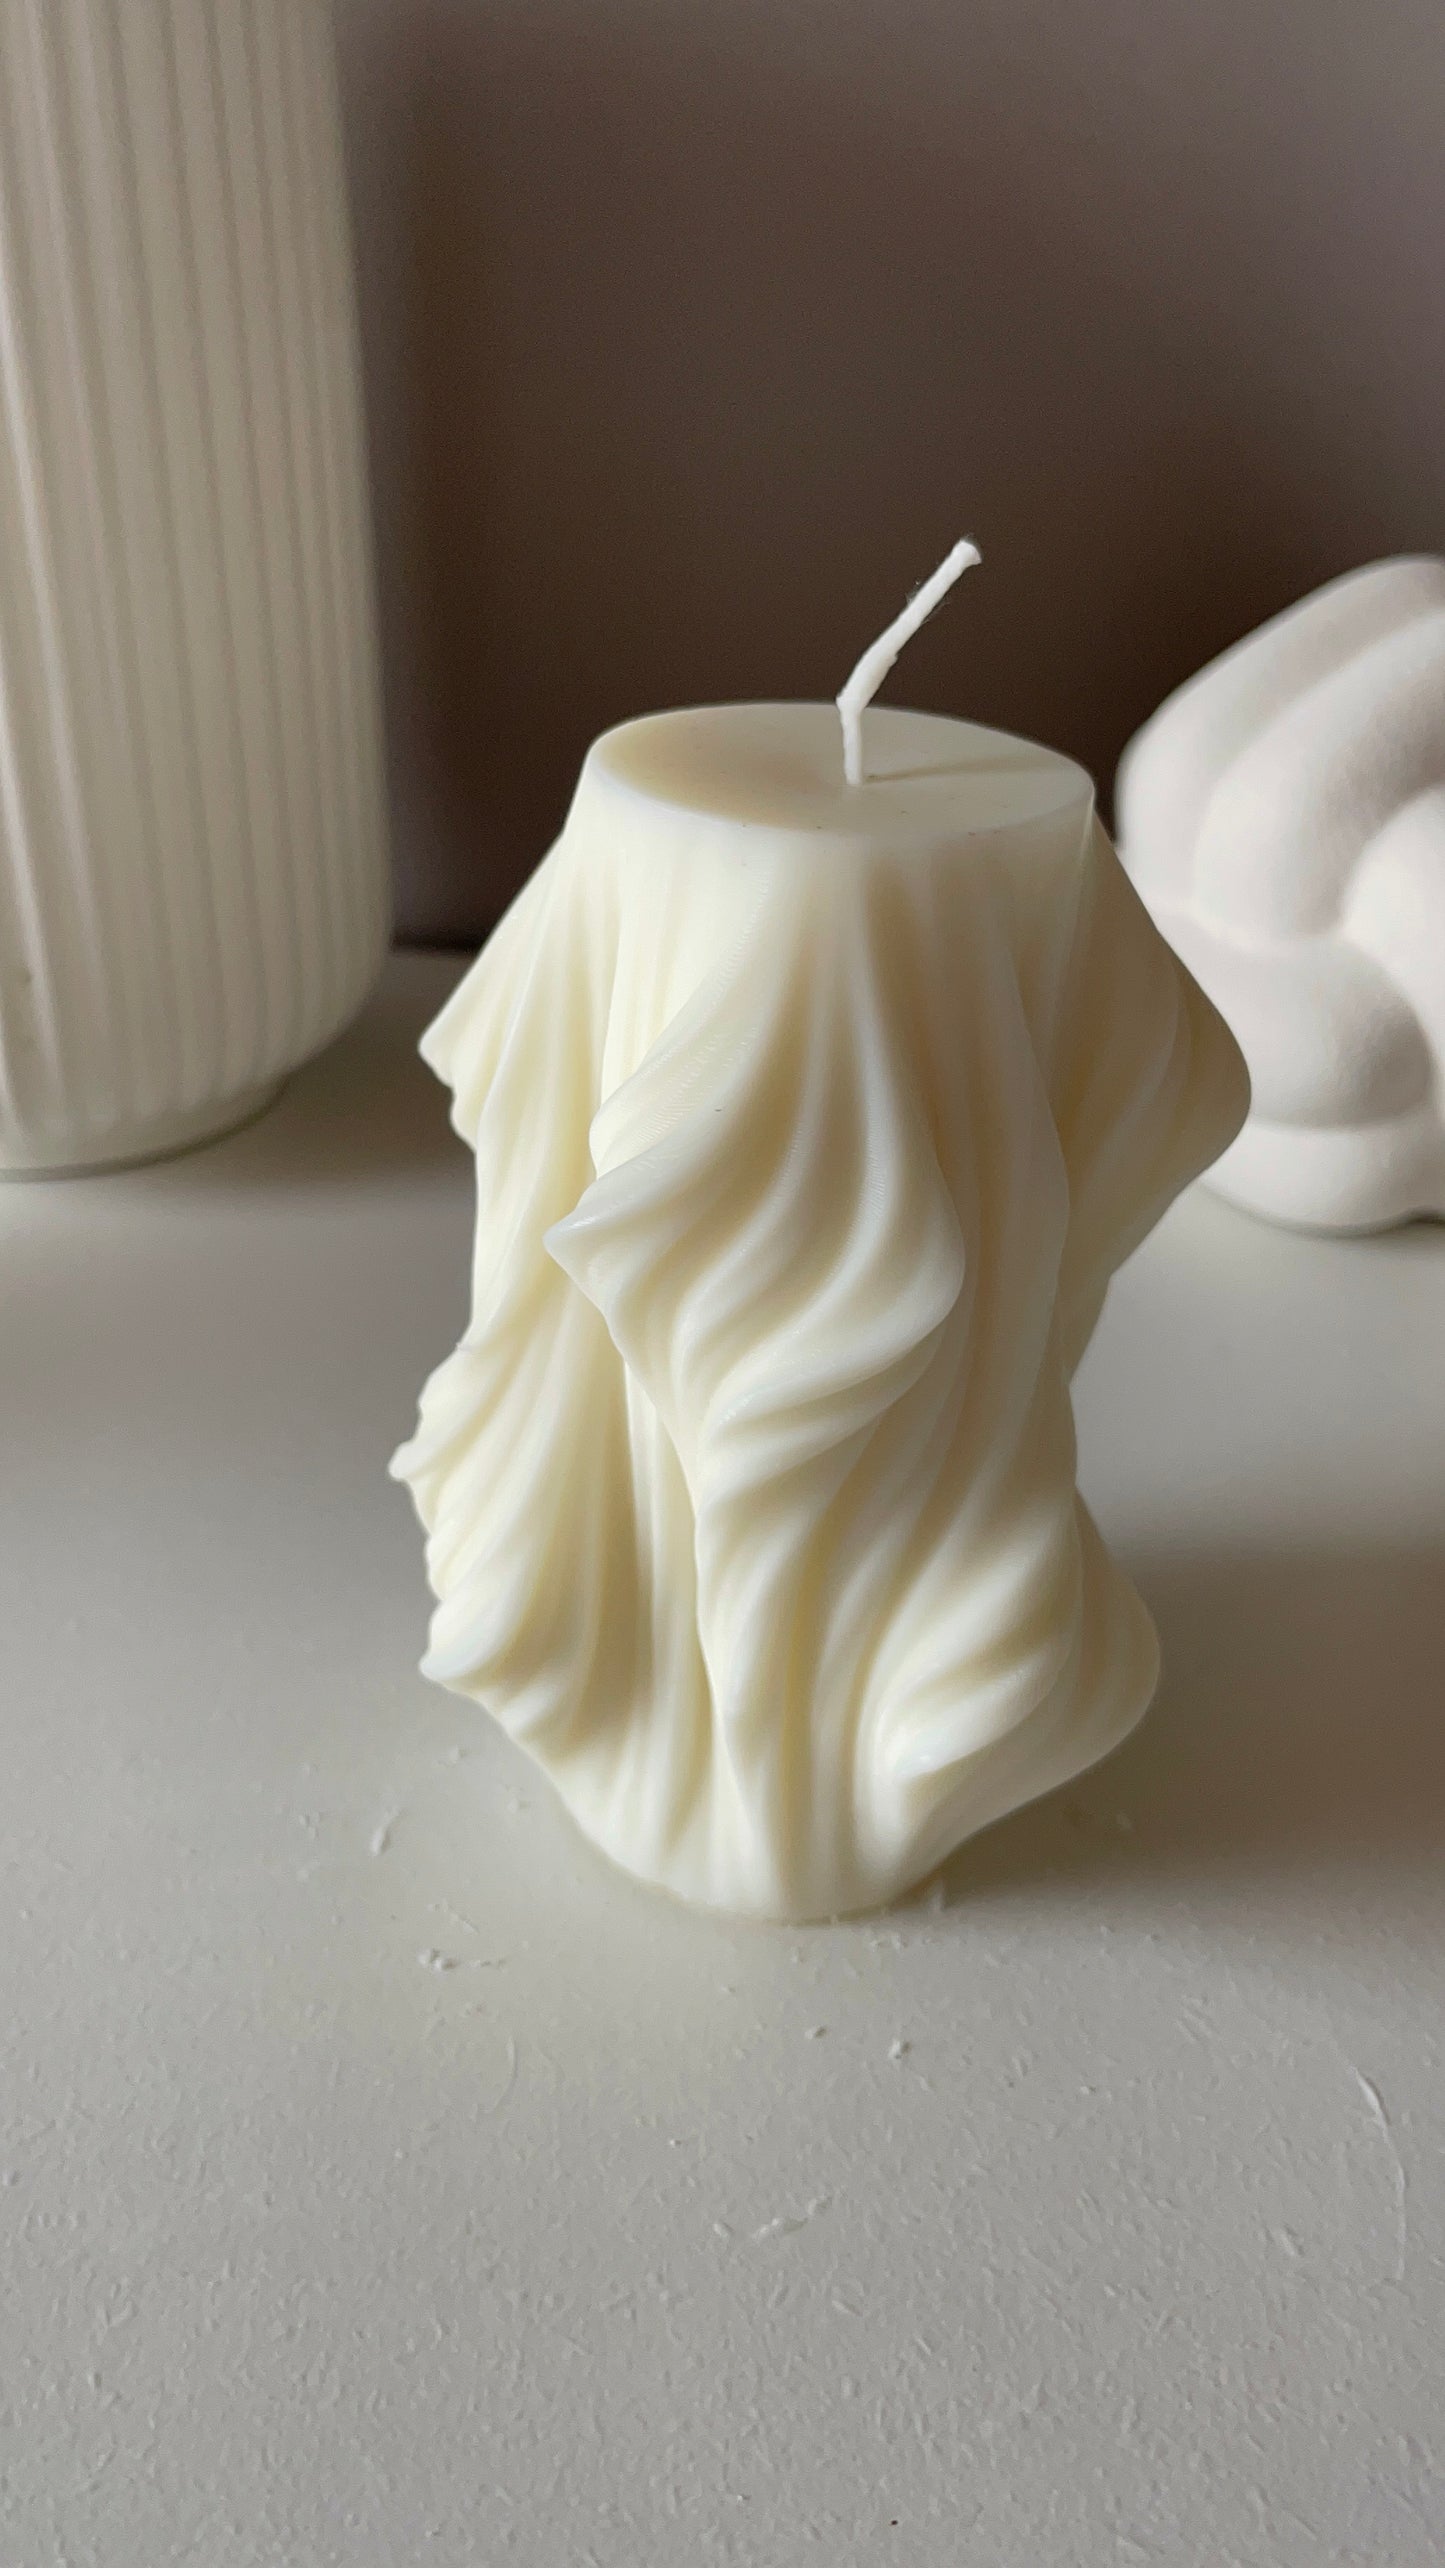 The Sculpture Candle